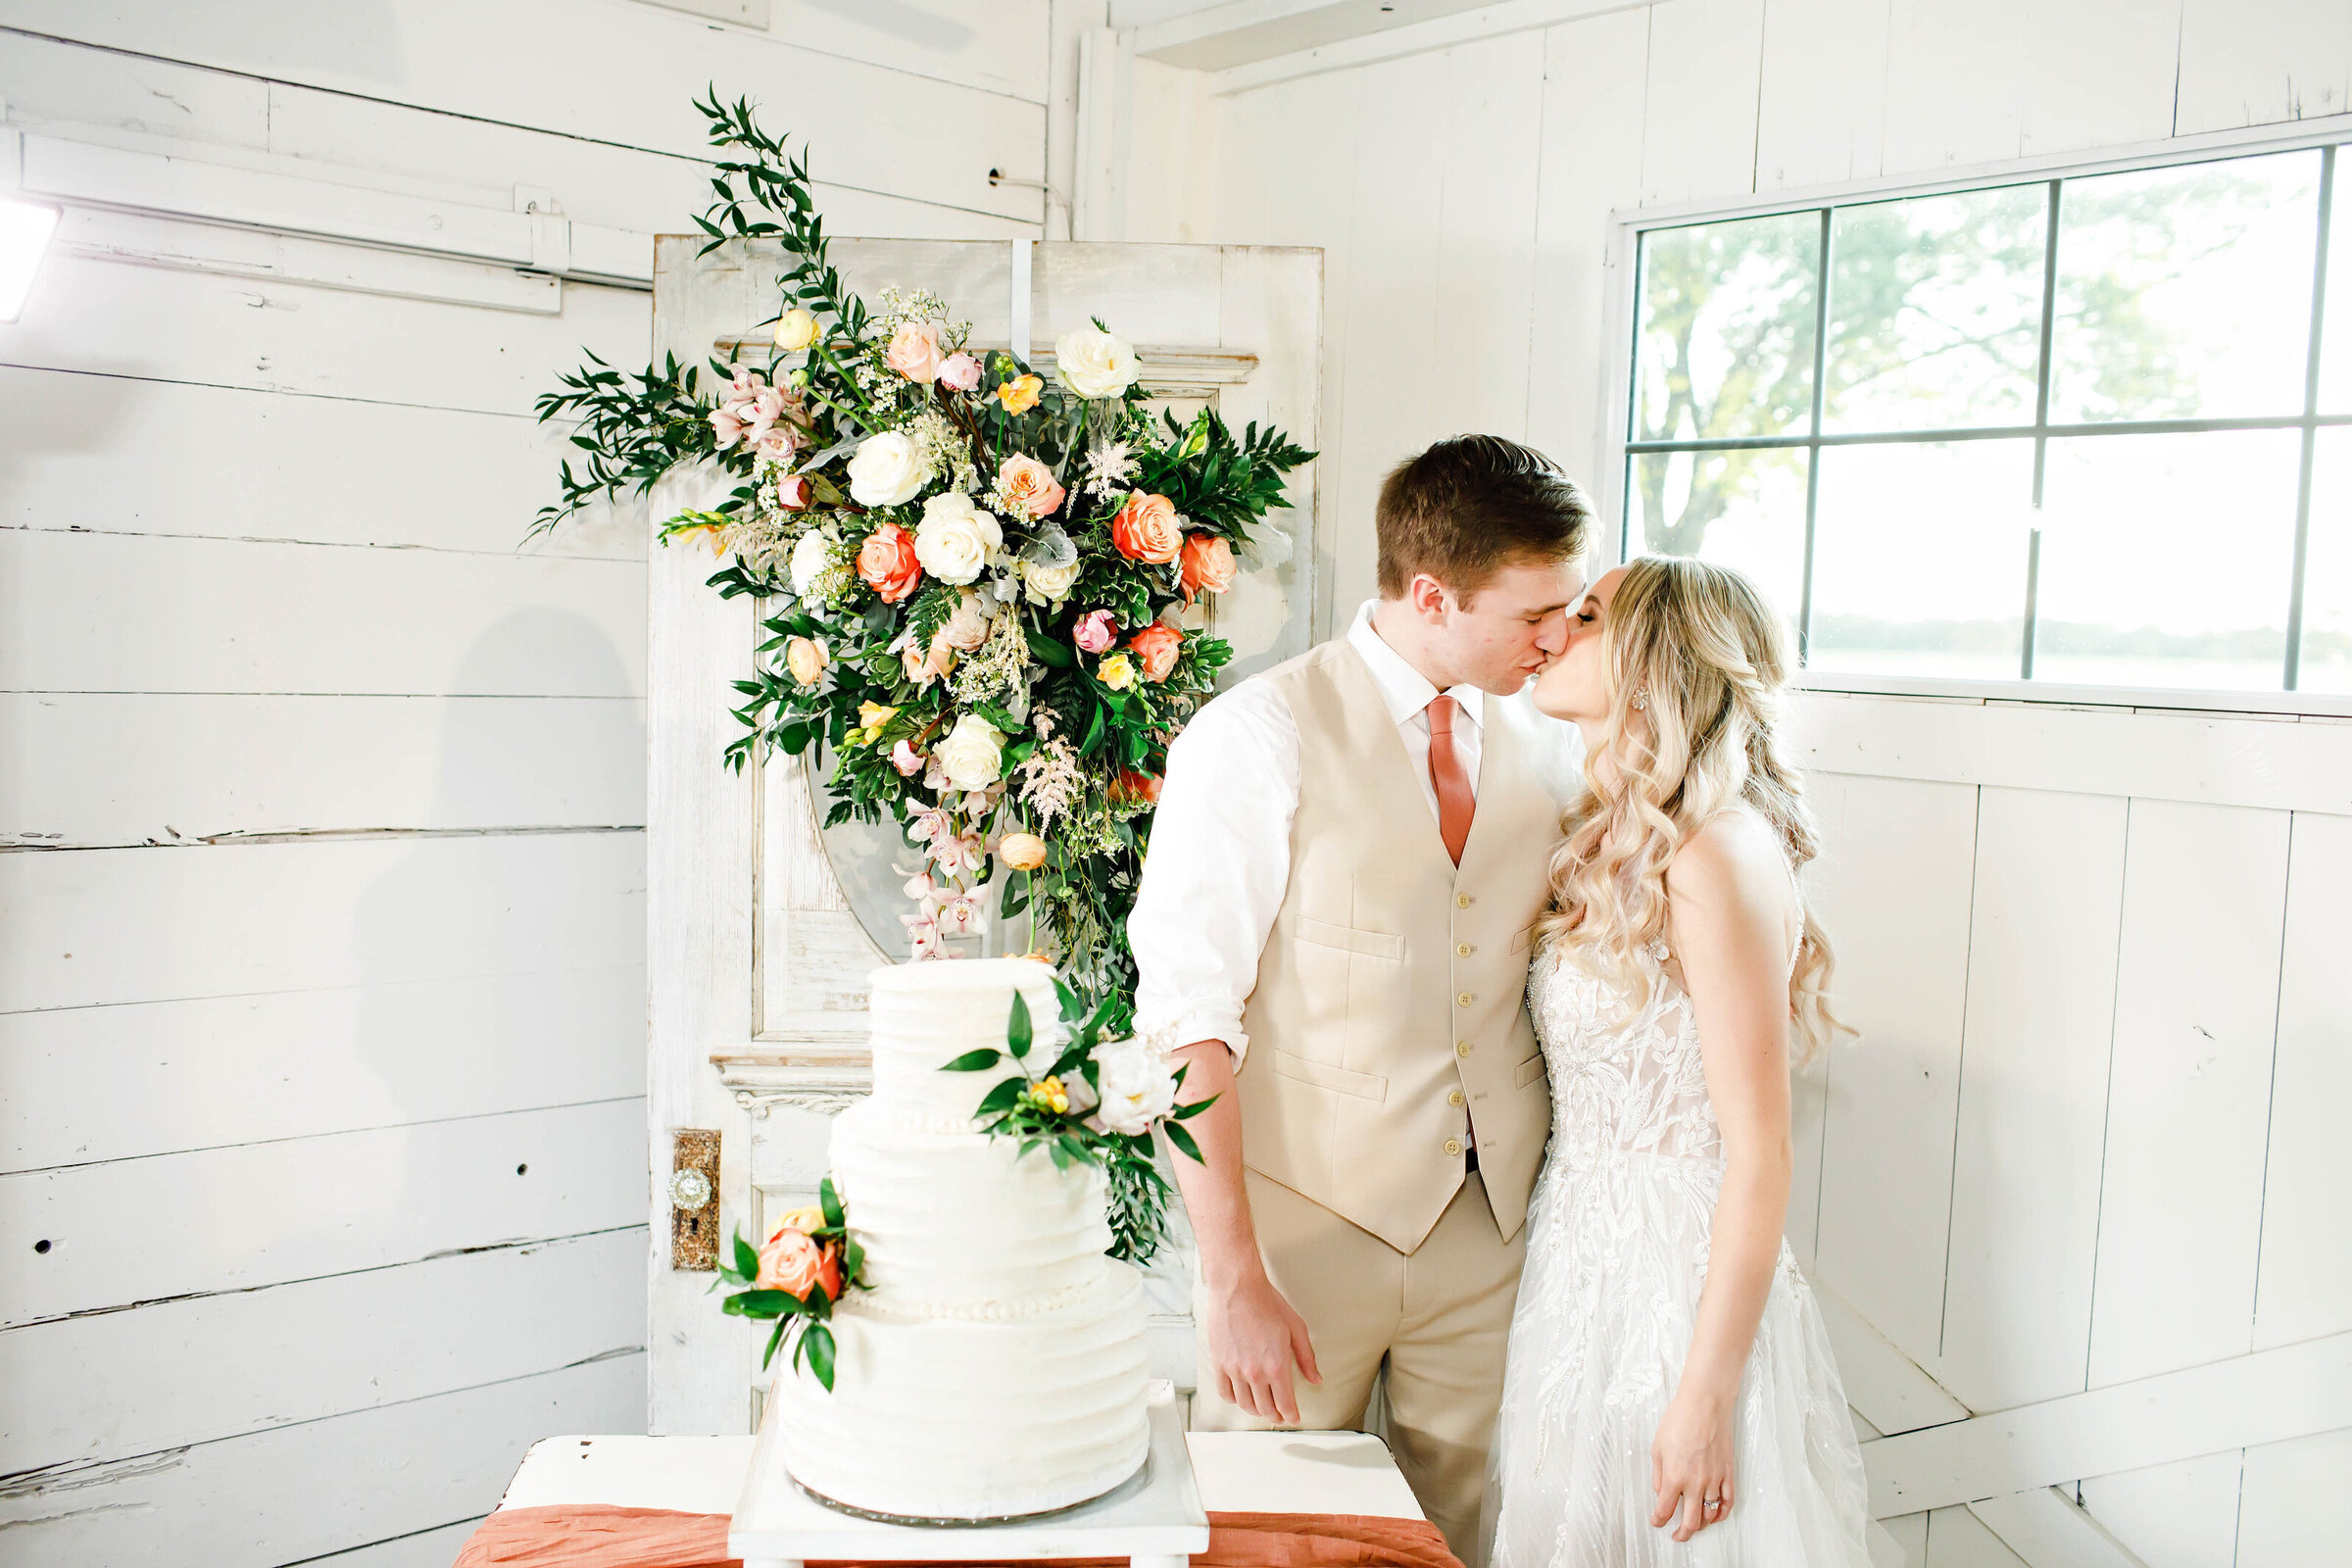 A bride and groom kissing each other by their wedding cake. Behind them is a gorgeous floral arrangement and an all white wedding cake with florals on it